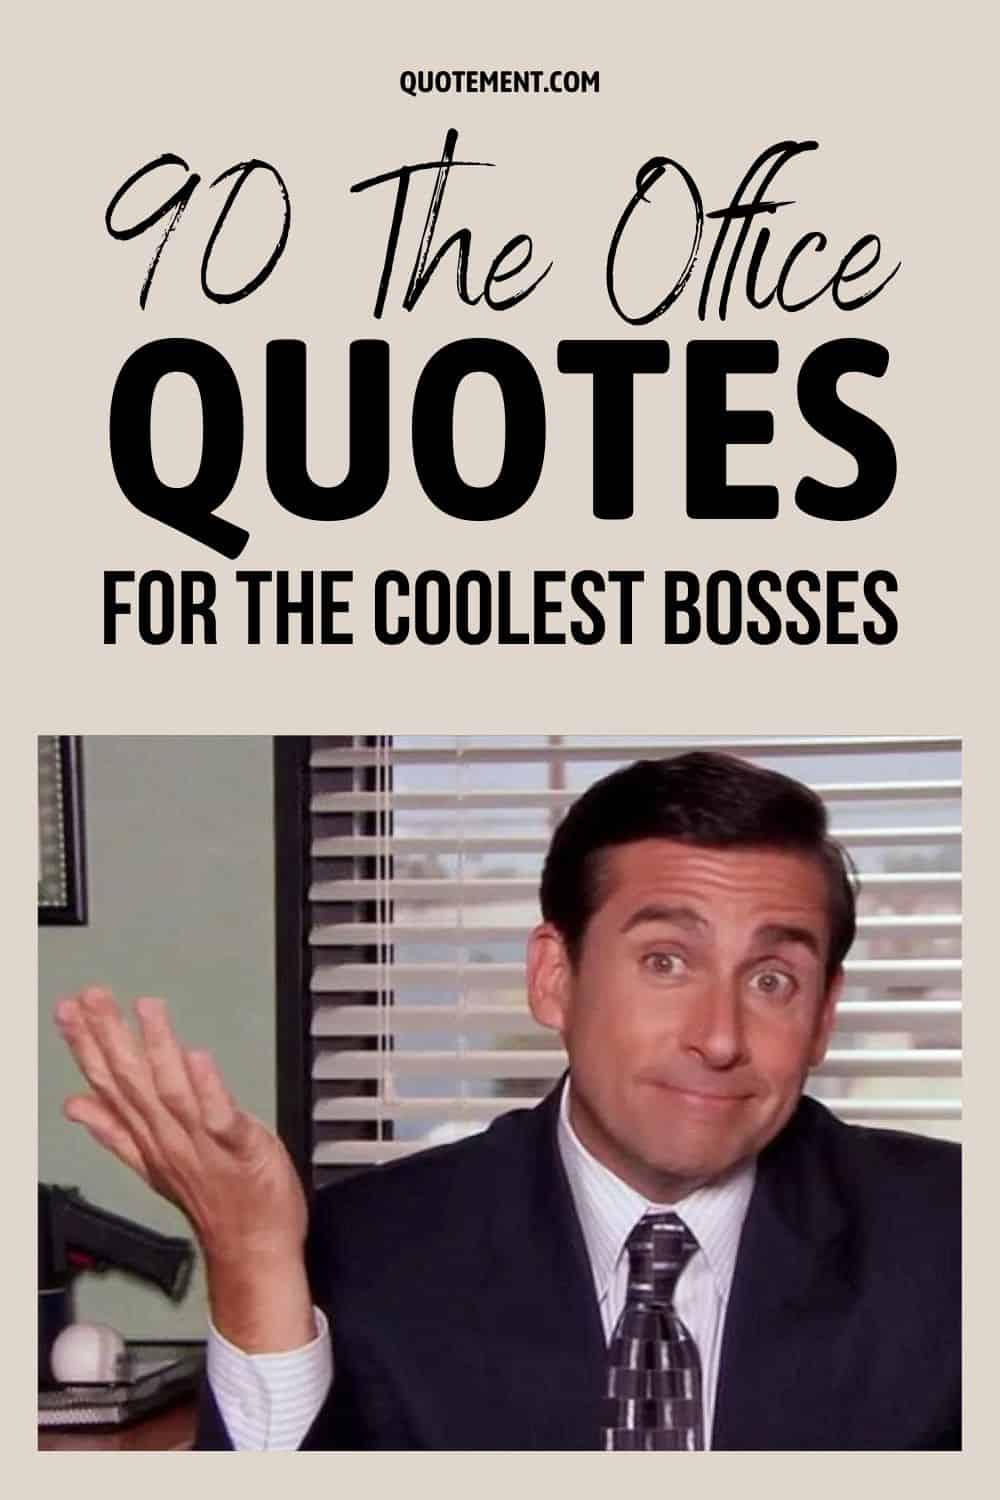 90 The Office Quotes For The Coolest Bosses